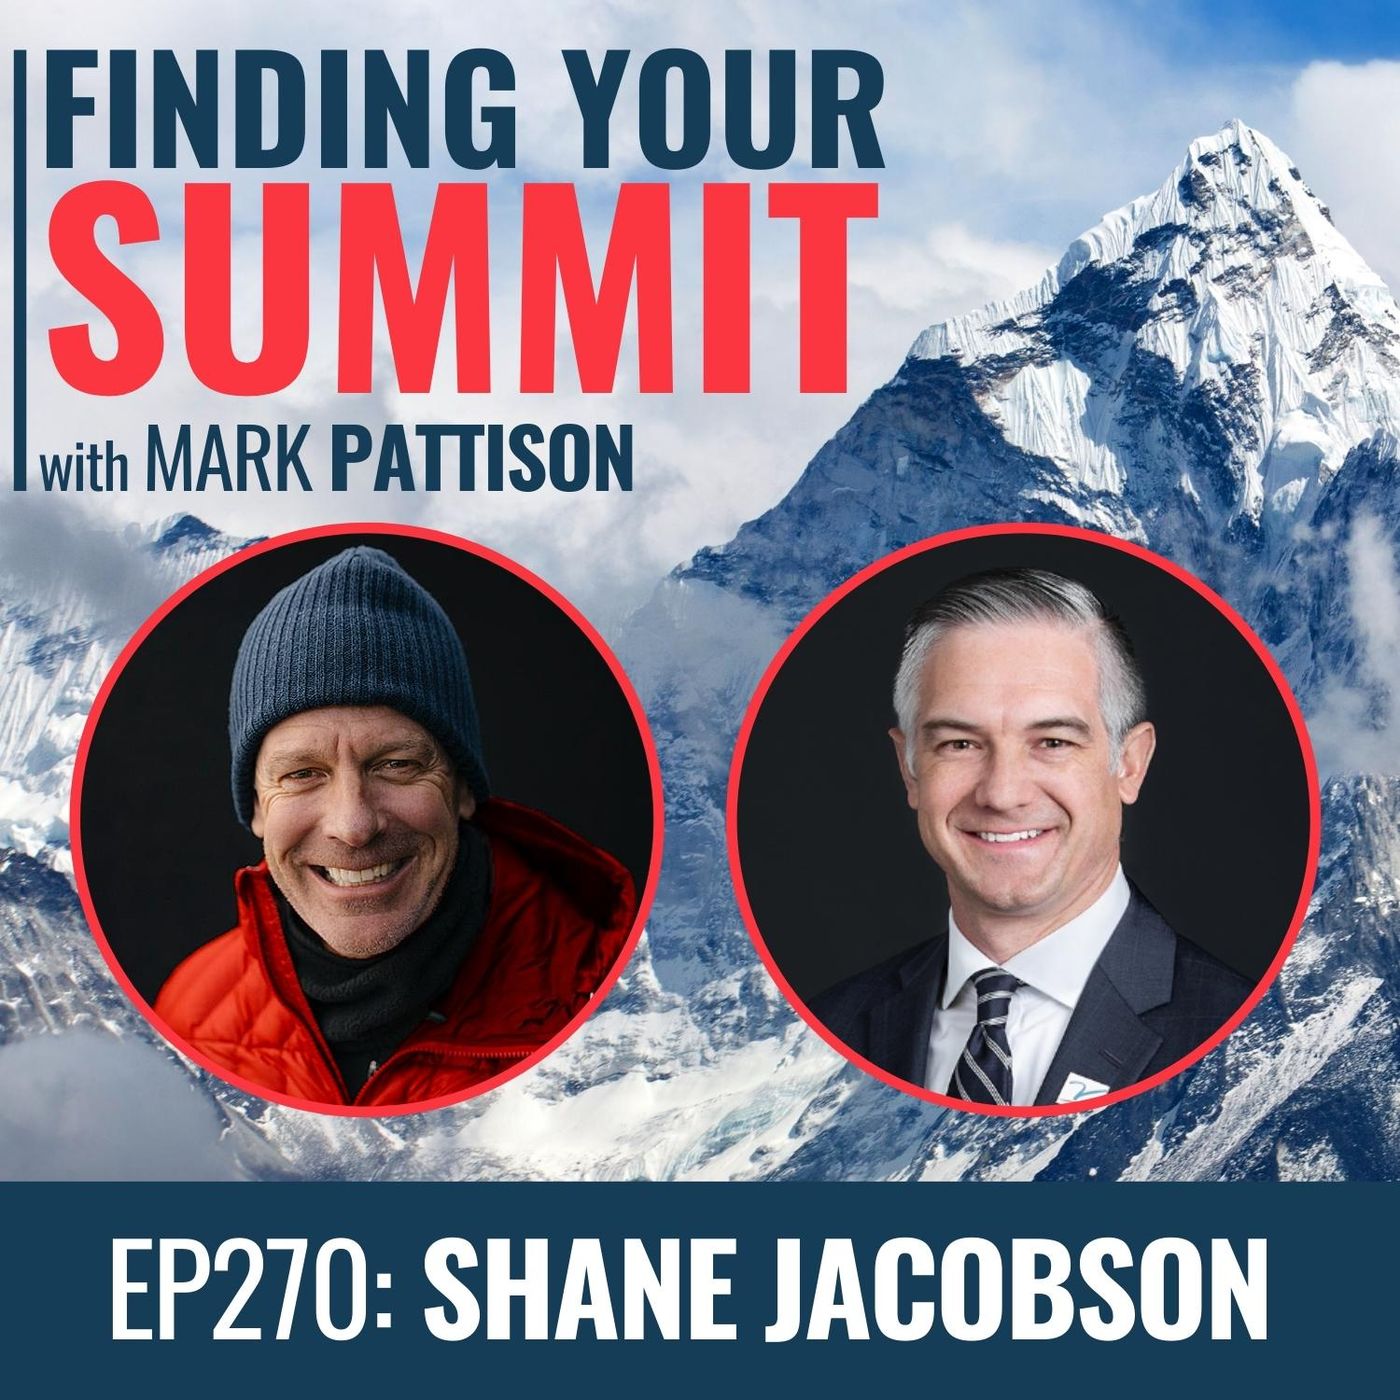 EP 270: Shane Jacobson, CEO of the V Foundation on kicking cancer and the impact Jim Valvano had